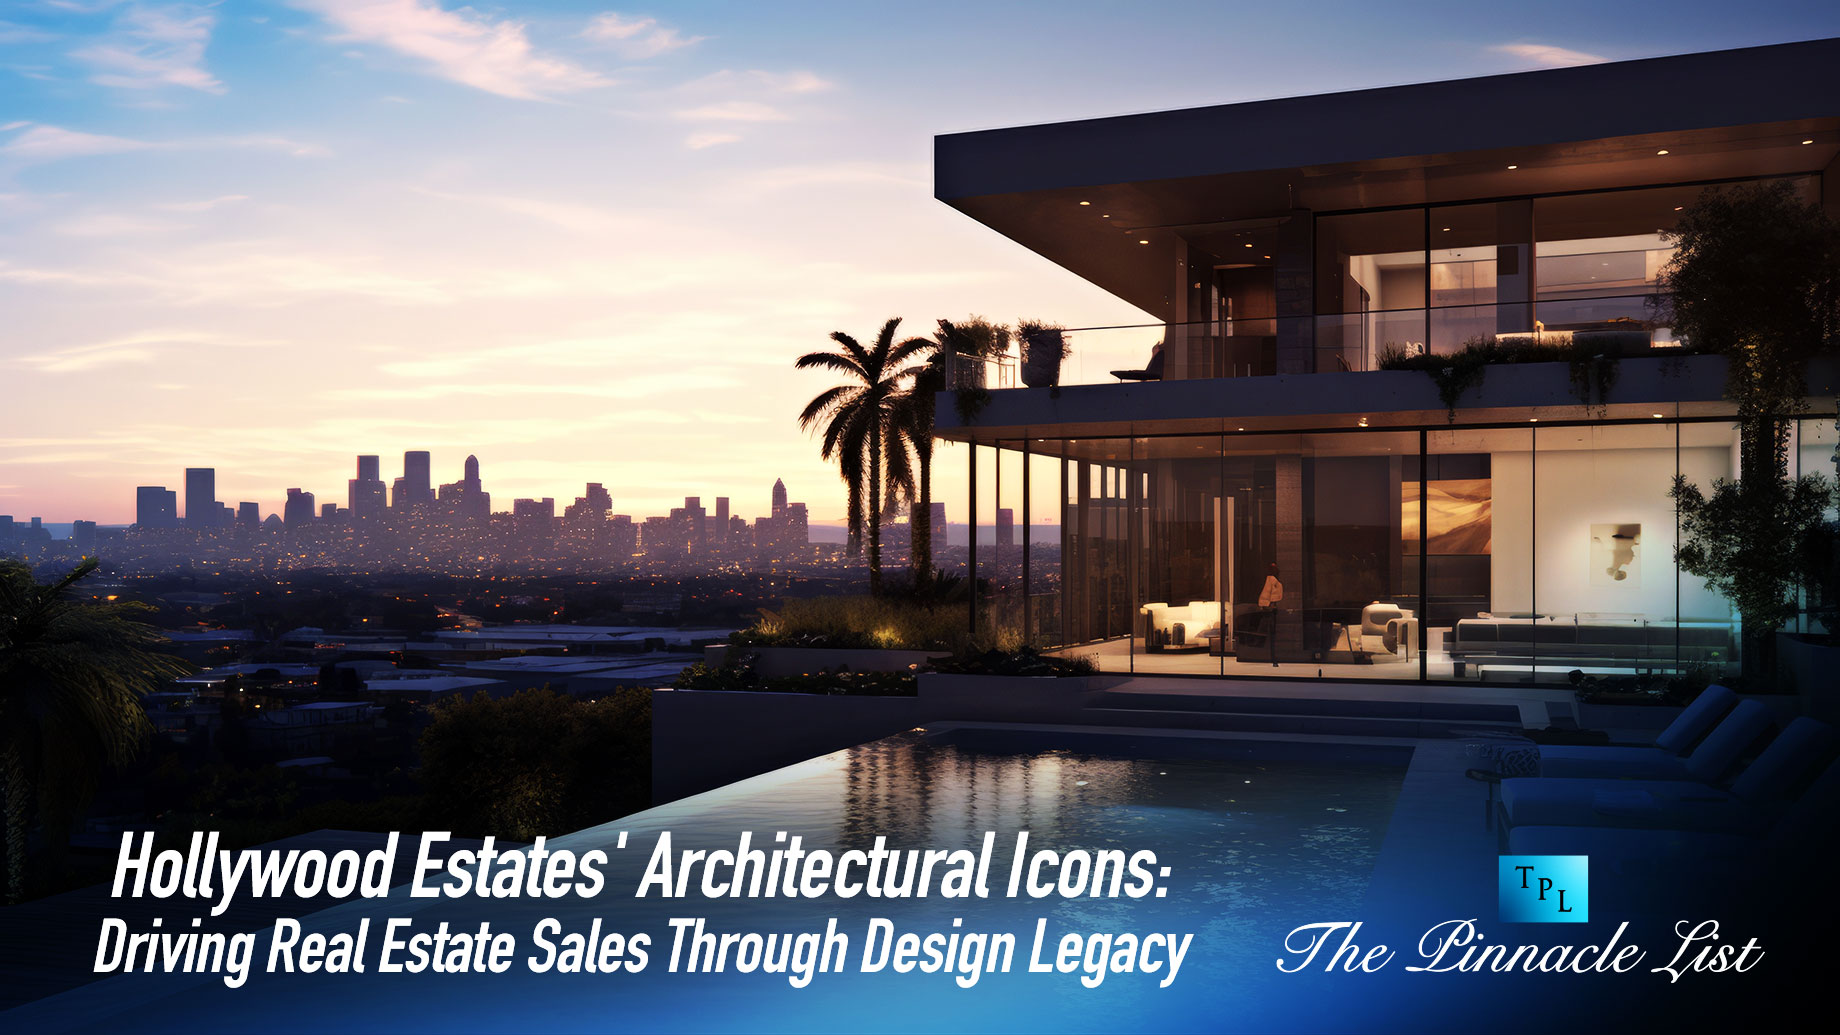 Hollywood Estates' Architectural Icons: Driving Real Estate Sales Through Design Legacy